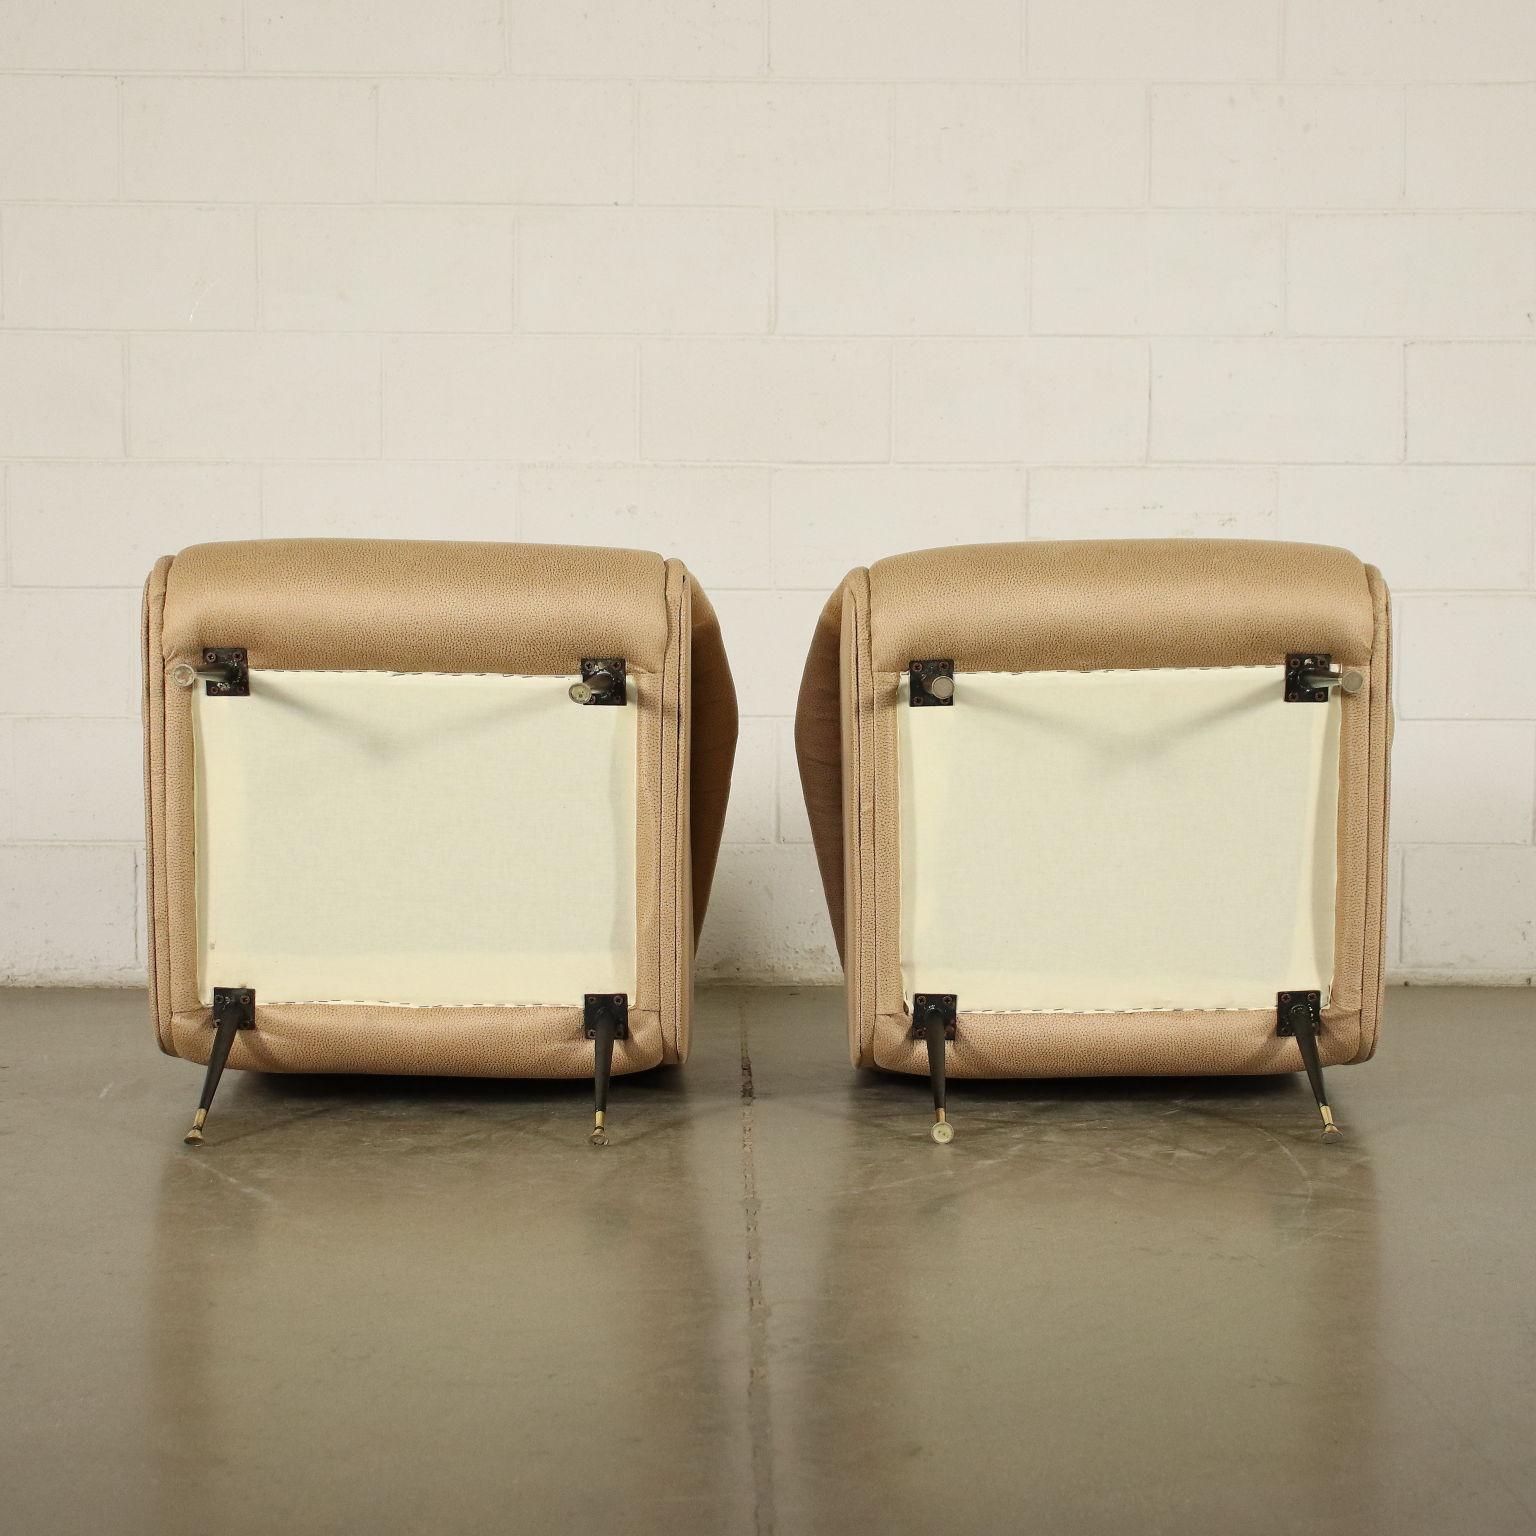 Pair of Armchairs Foam Leatherette, Italy, 1950s 1960s For Sale 5